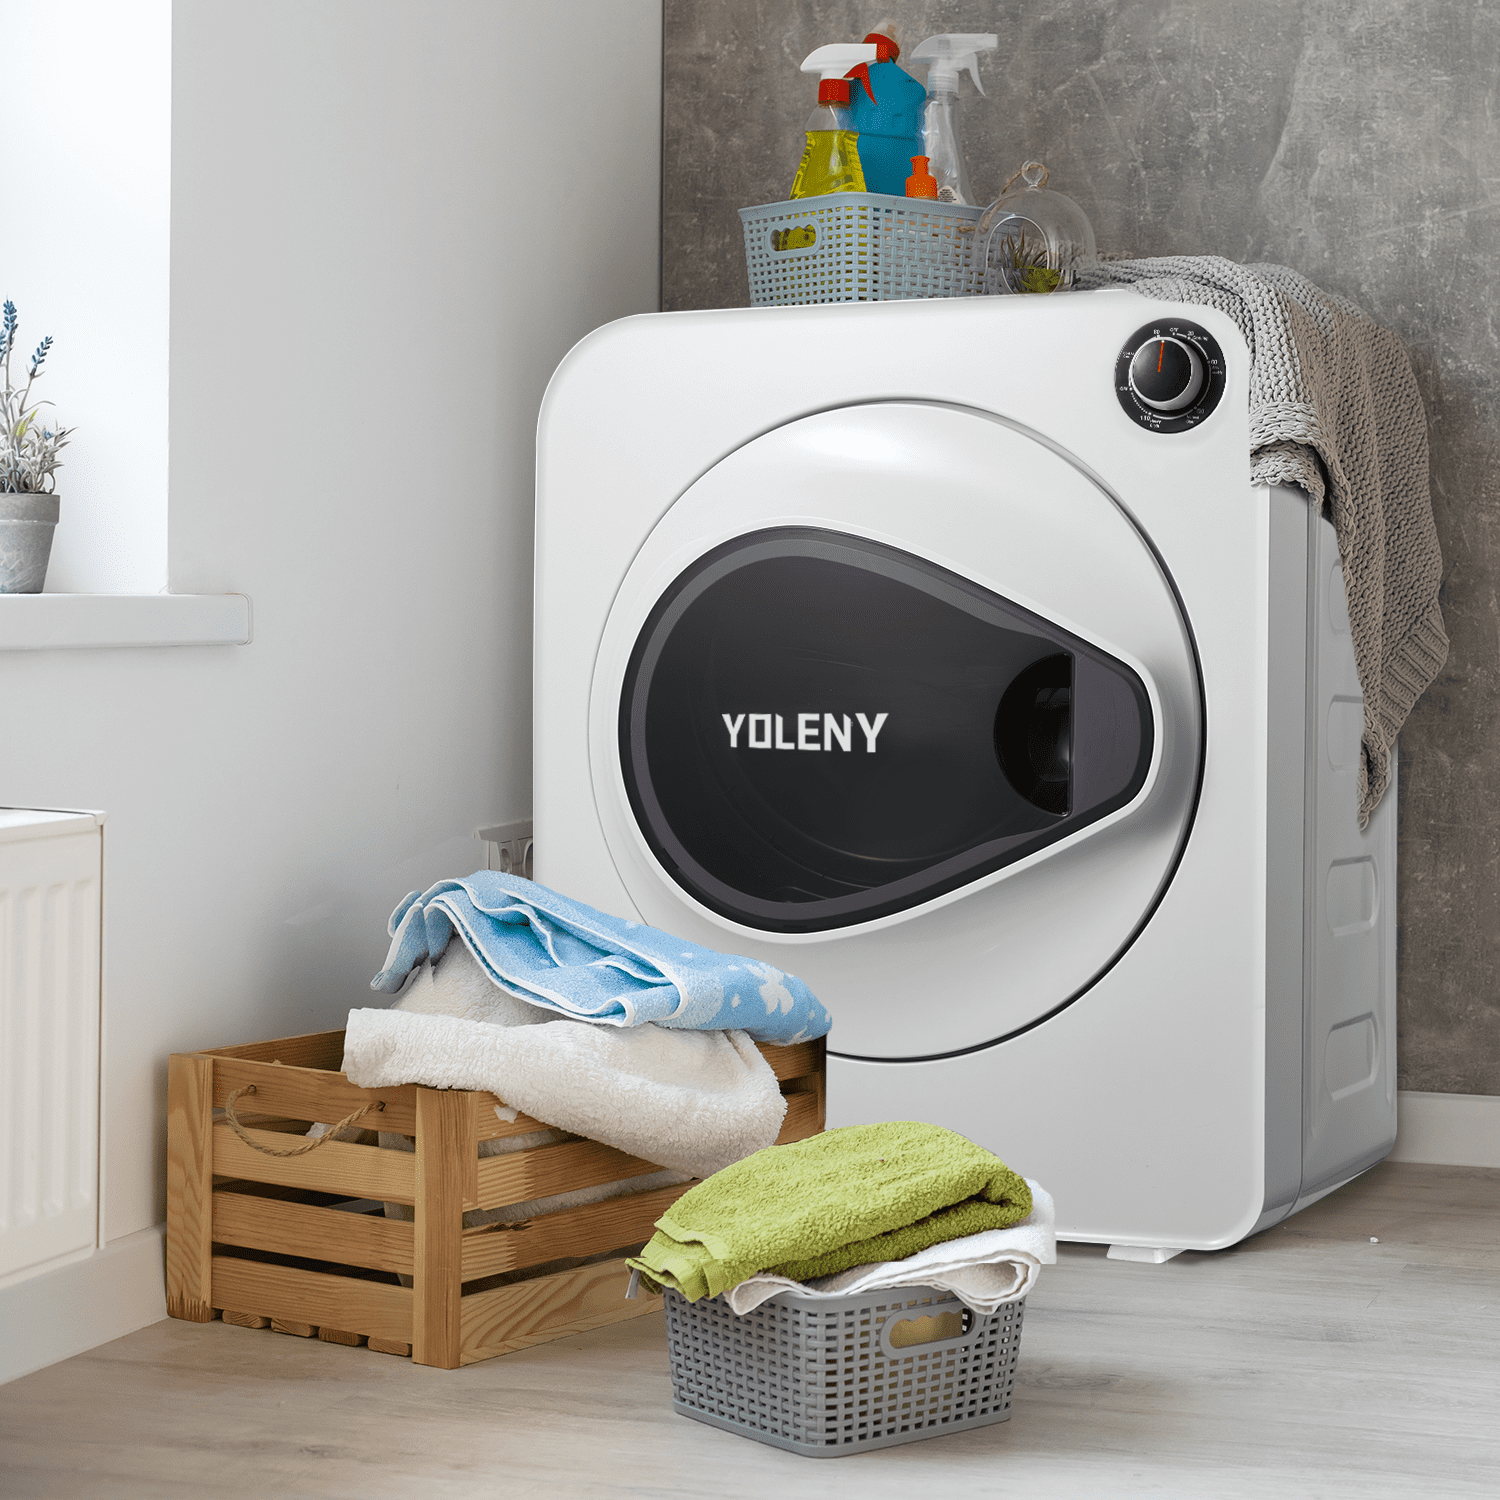 Yoleny Electric Compact Laundry Dryer, 13.2 lbs Load Stainless Steel  Portable Dryer With Exhaust Pipe, Mini Dryer for Apartments, Dorm, White